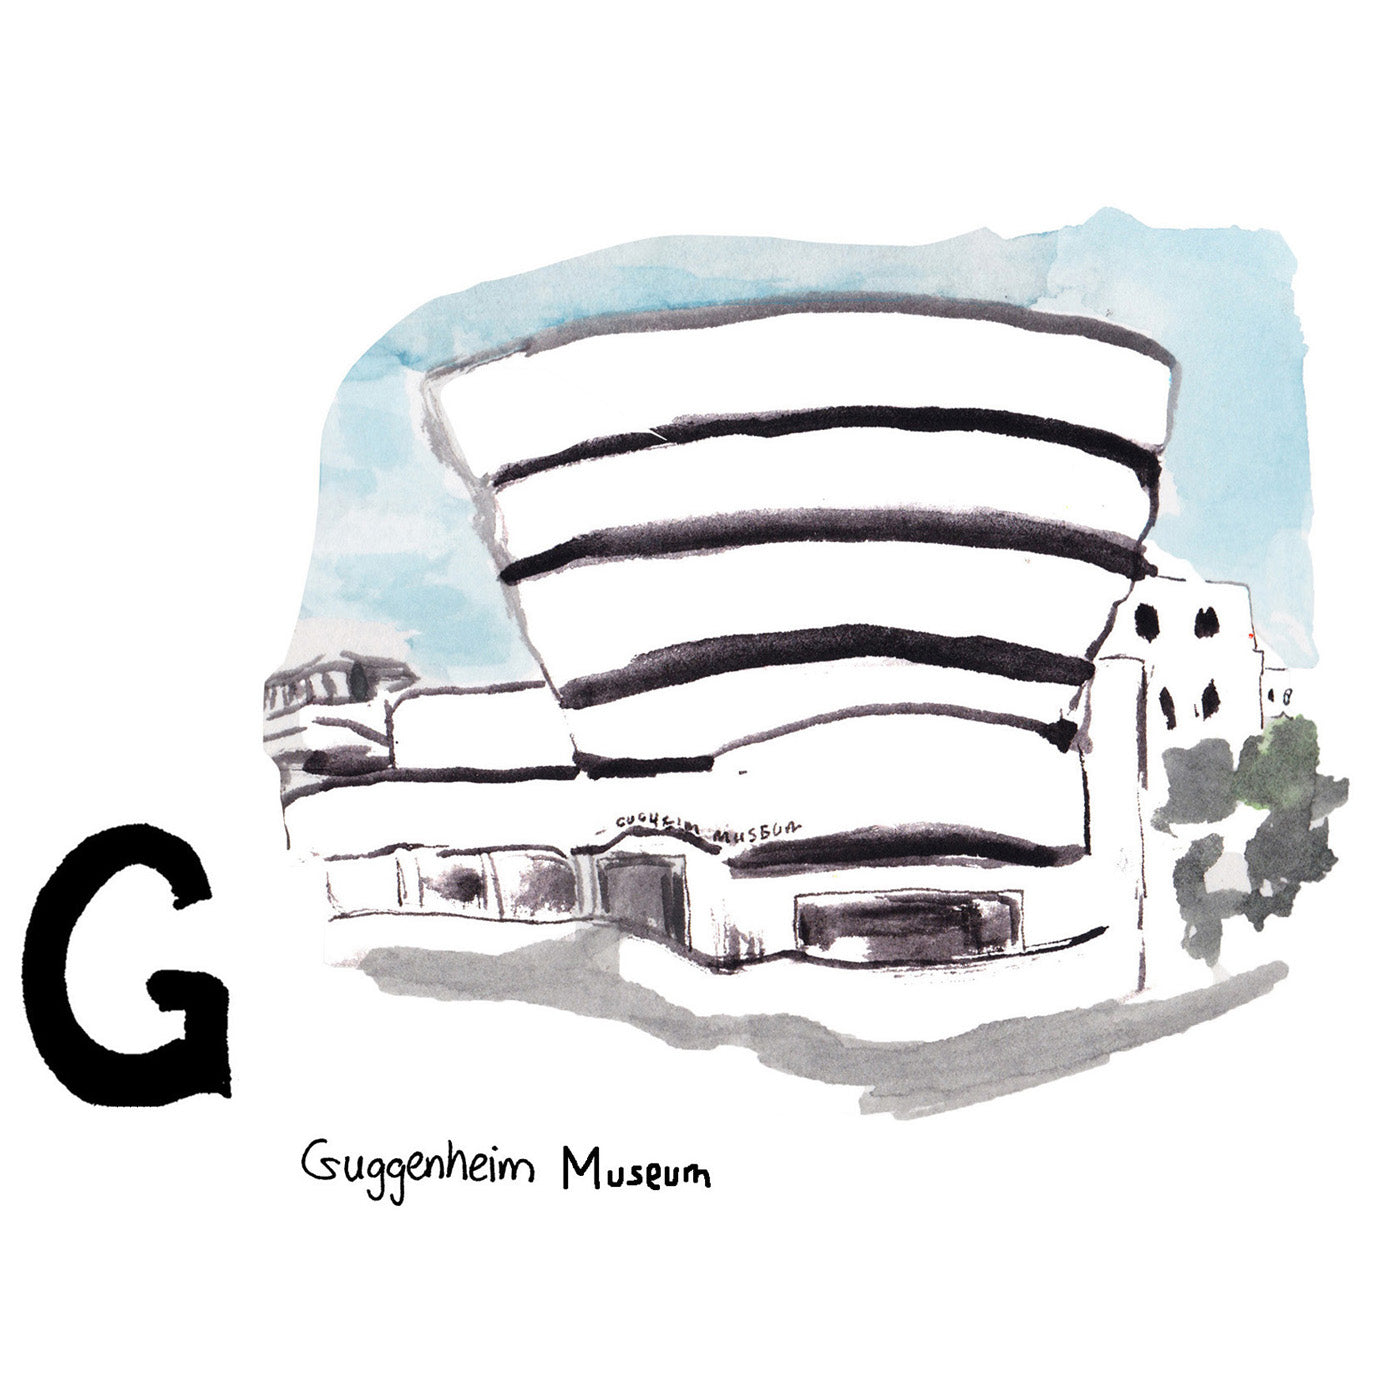 G is for Guggenheim Museum. Named after the first owner, Solomon R. Guggenheim, the museum moved into its iconic 20th century architecture building designed by Frank Lloyd Wright in 1952.